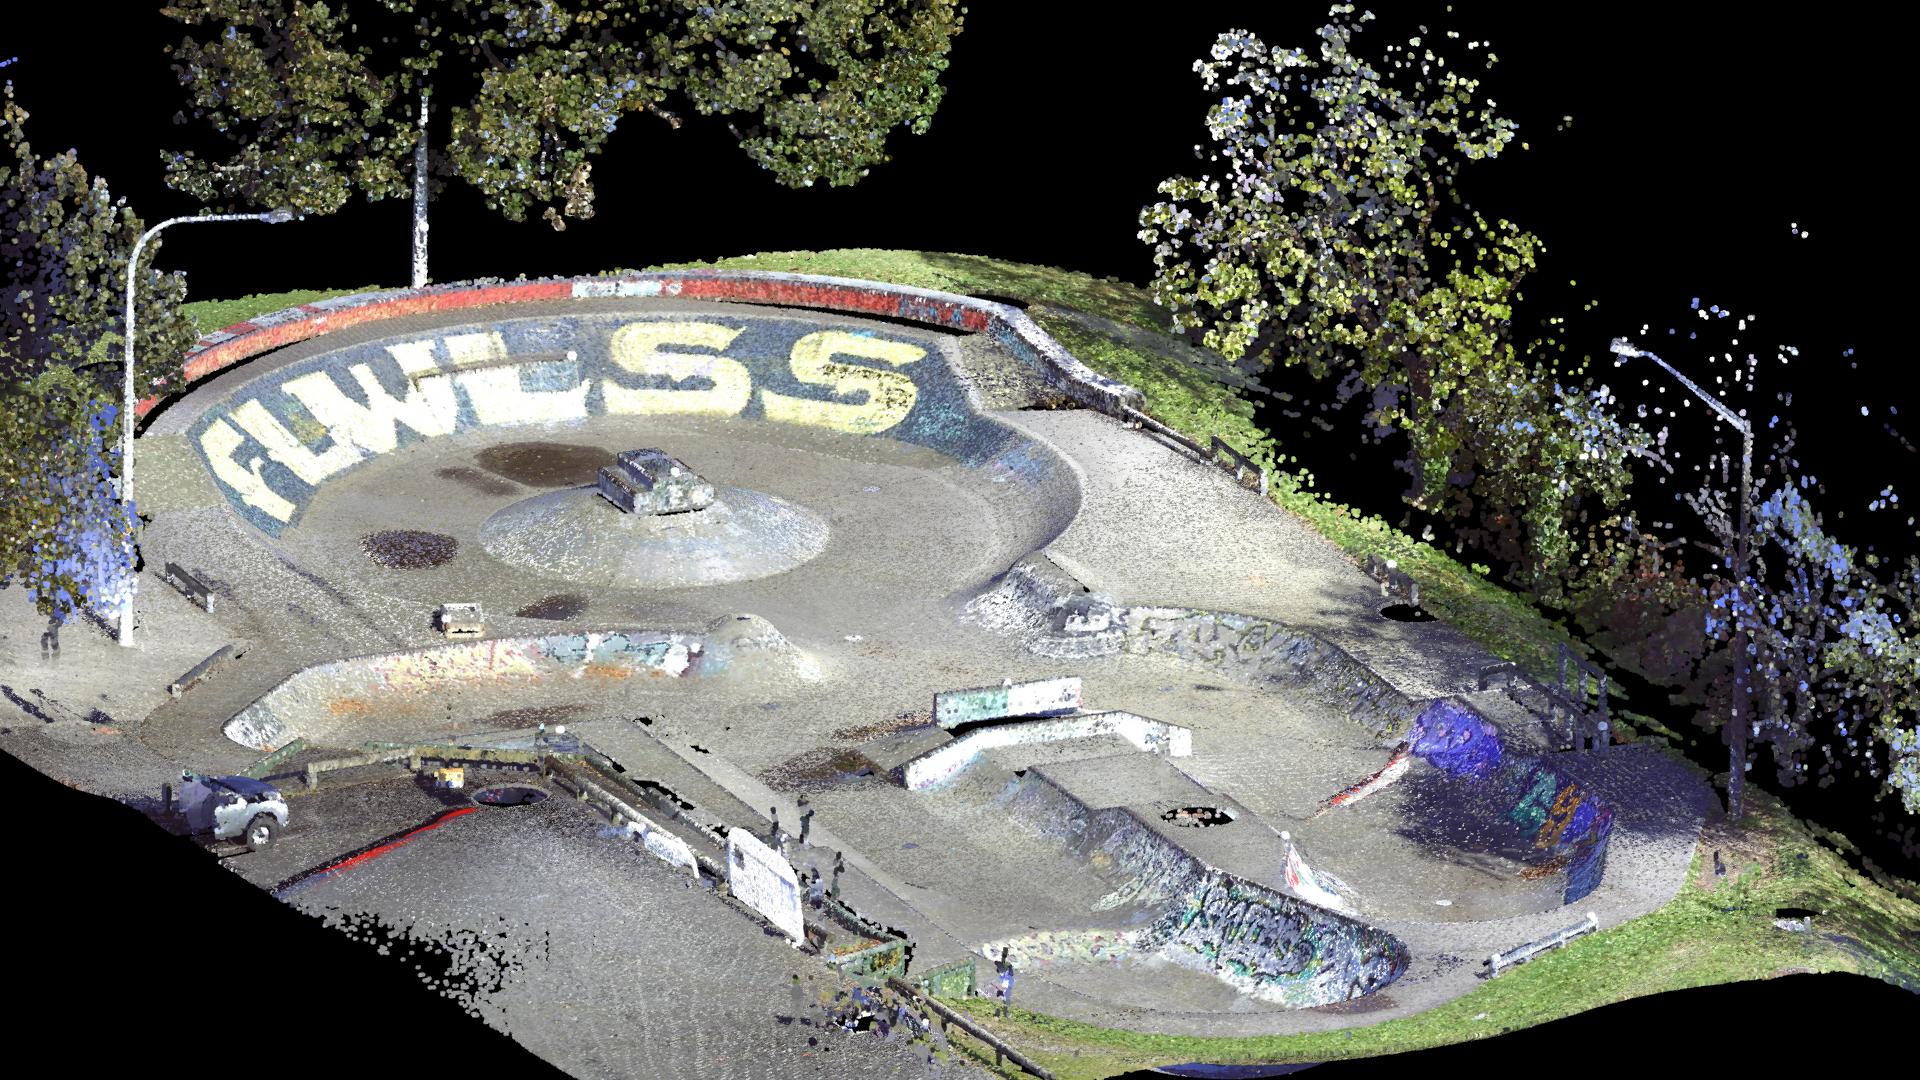 3D point cloud captured with out laser scanner.